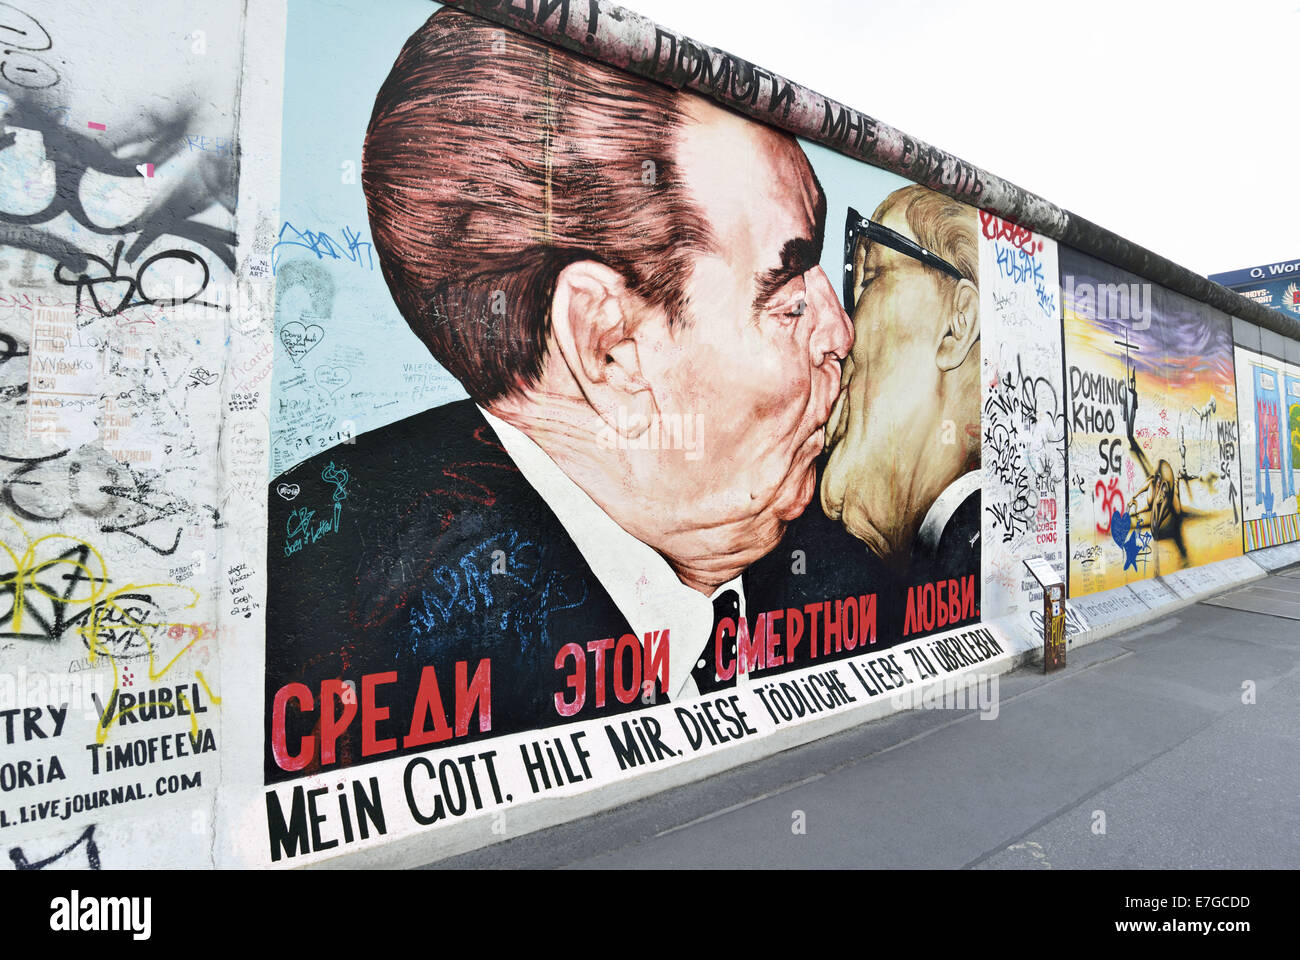 Germany, Berlin, East Side Gallery, Berlin Wall, wall, painting, Brother Kiss, Breschnew, Honecker, Sowjetunion, DDR, Comunism, travel, tourism, sightseeing, Wall of Berlin, street arts, Dimitry Vrubel, famous wall scenes, Berlin historic tour, german capi Stock Photo